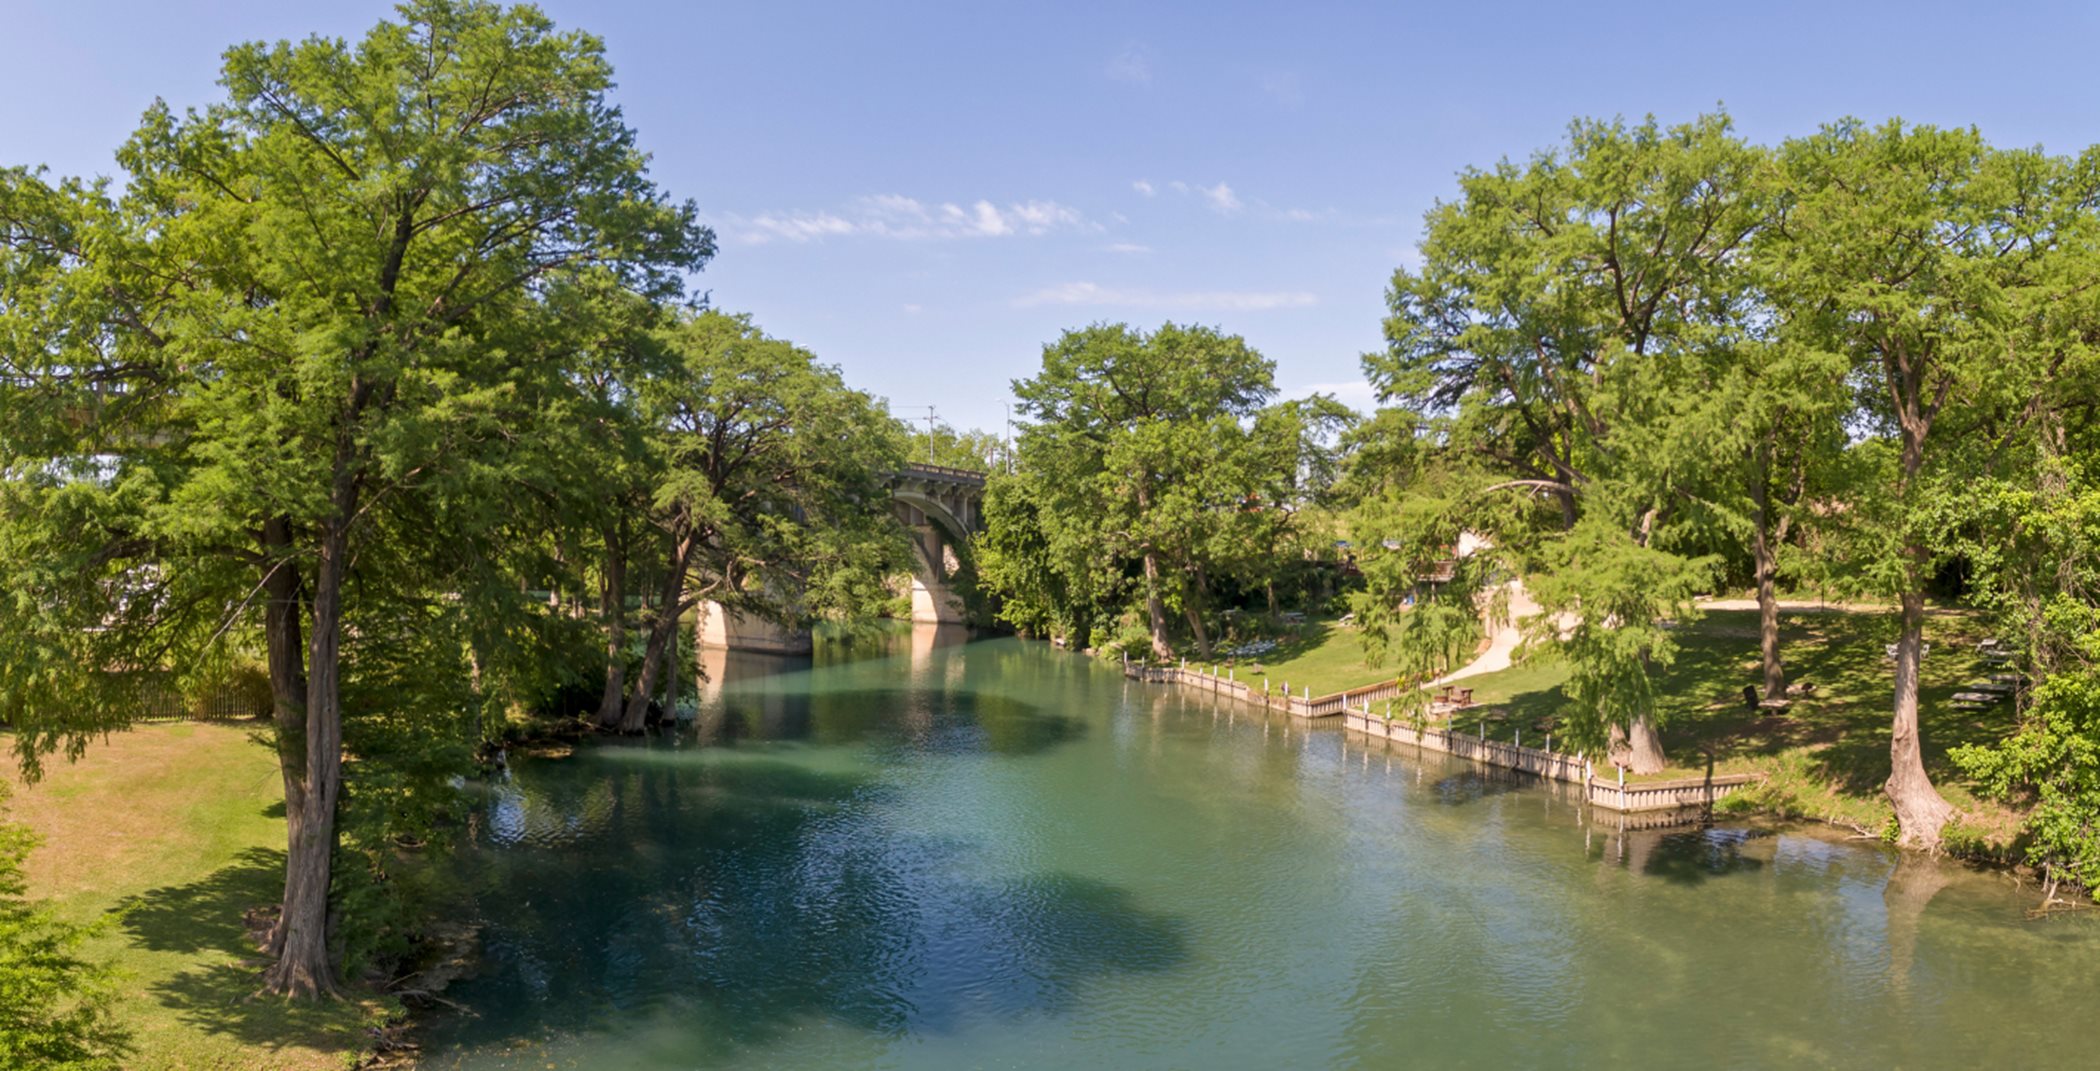 The Guadalupe River